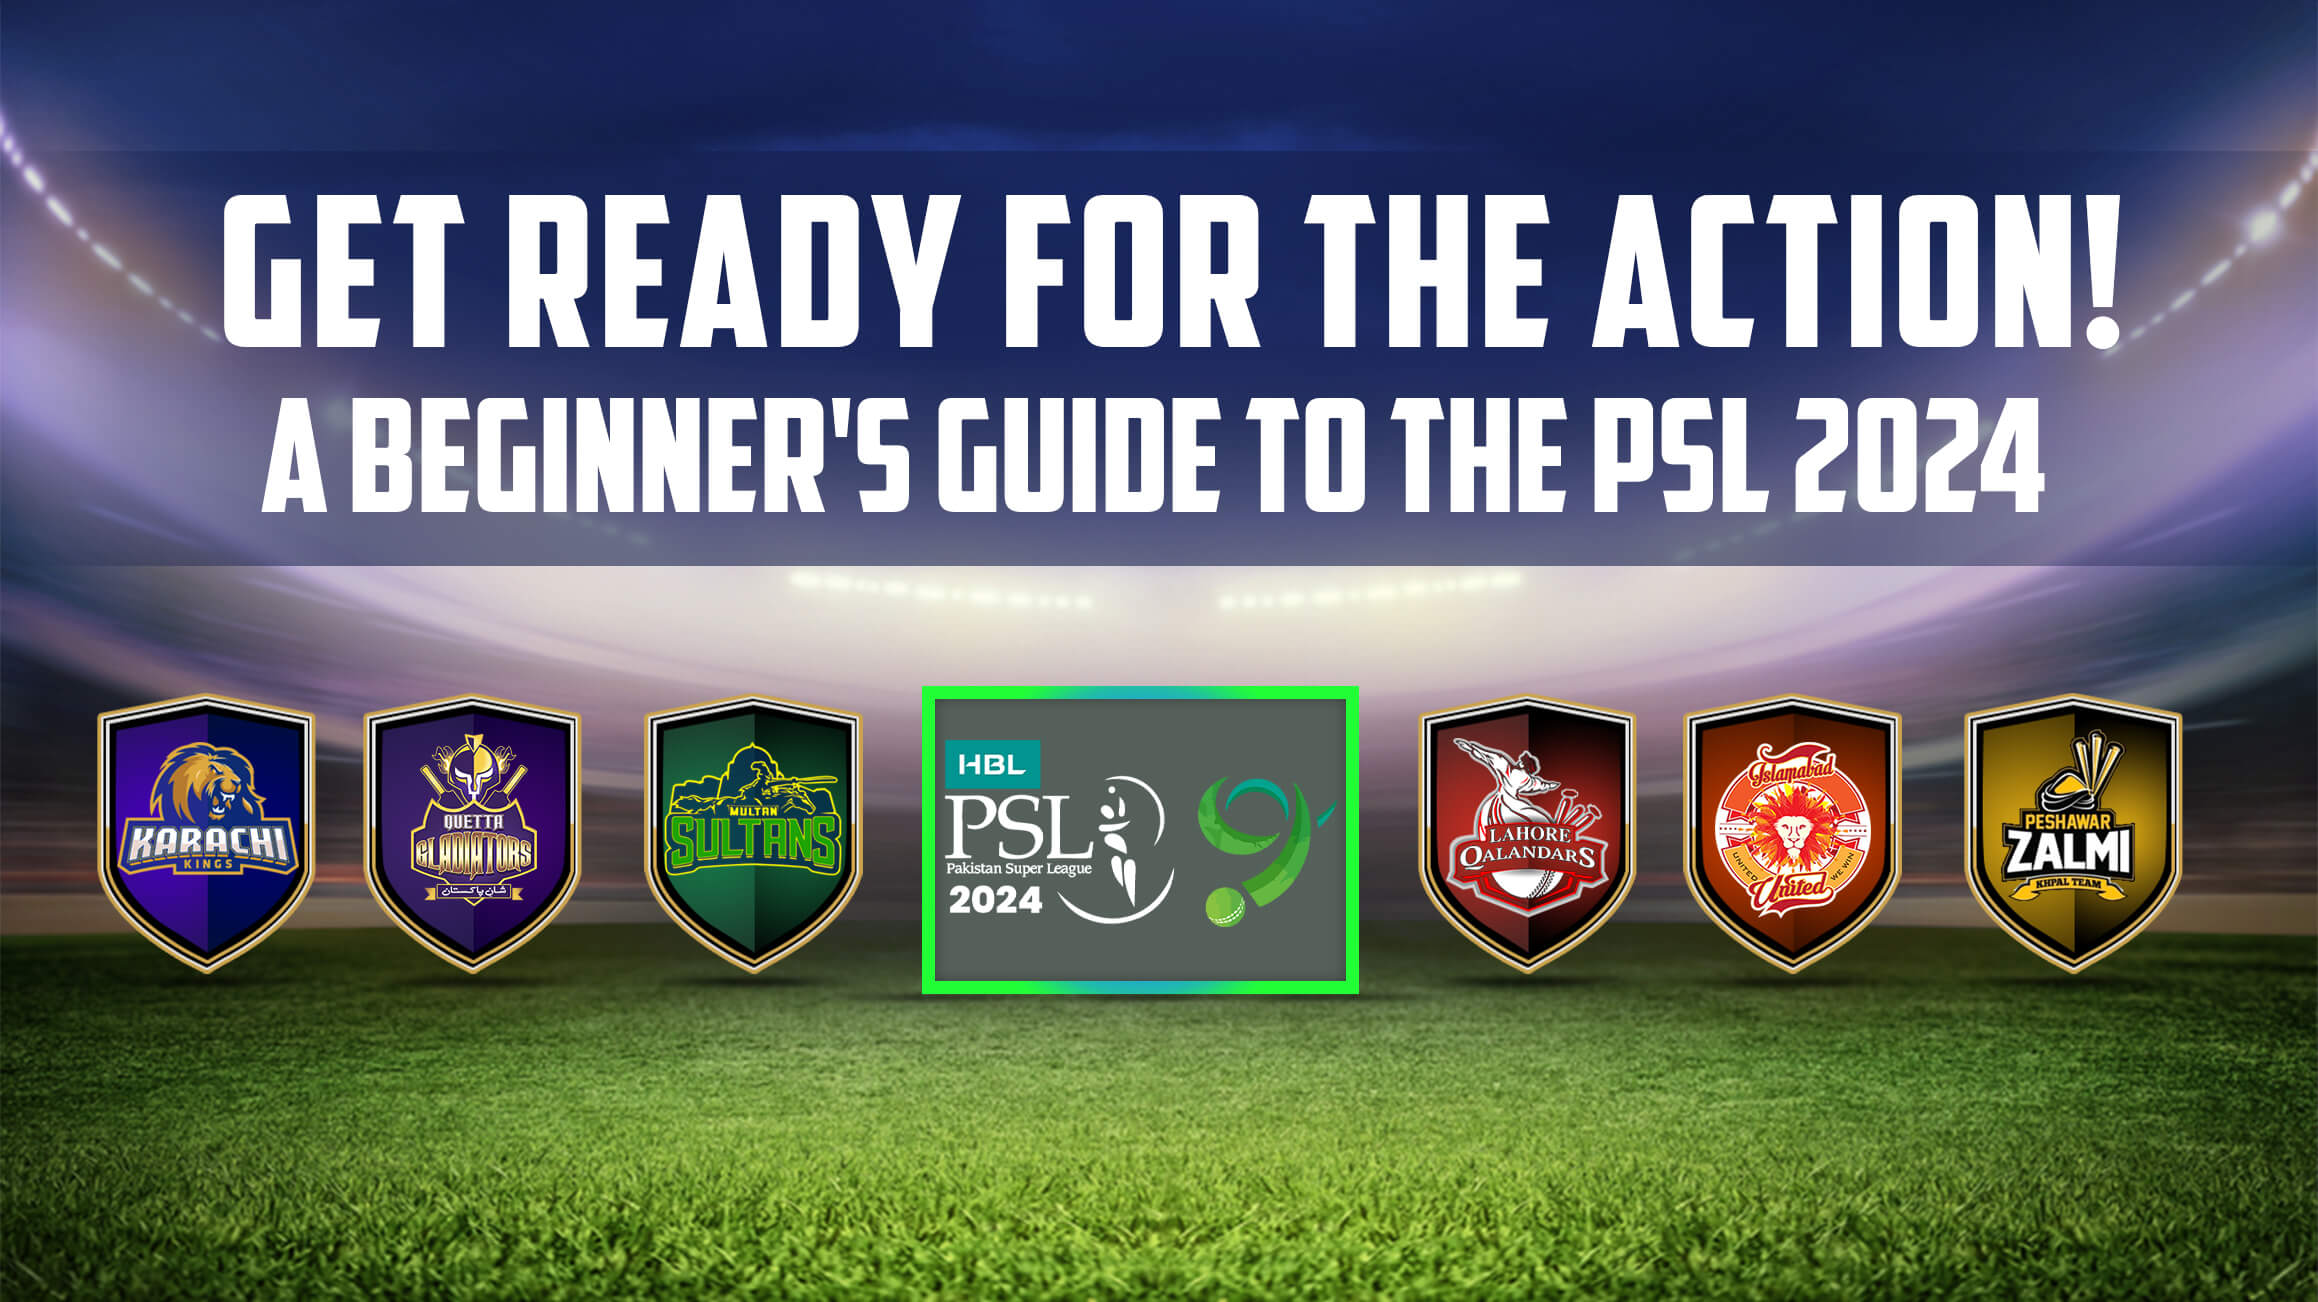 Get Ready for the Action! A Beginner’s Guide to the PSL 2024